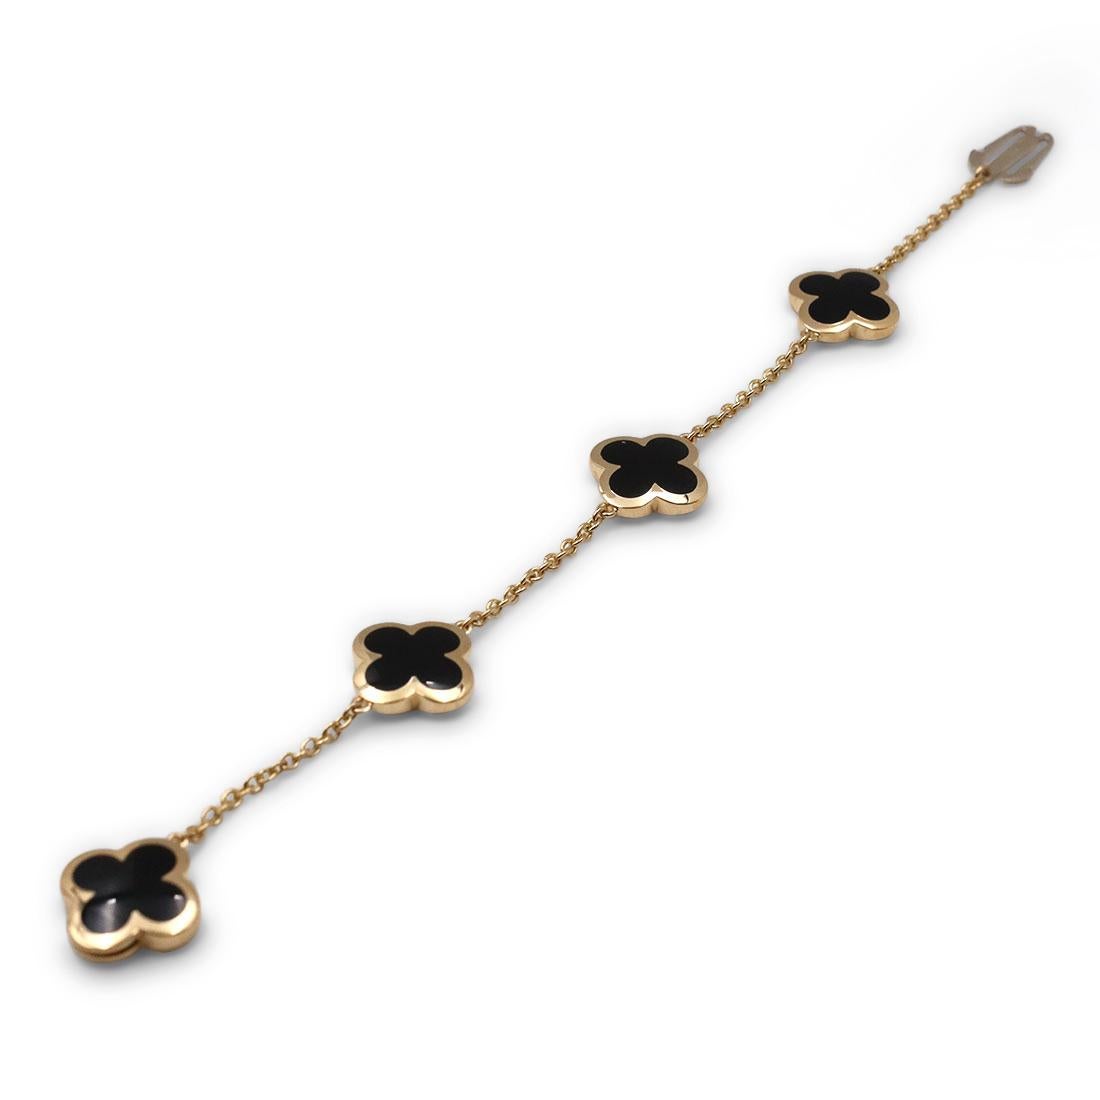 Authentic Van Cleef & Arpels 'Pure Alhambra' bracelet features clover motifs of carved onyx set in smooth, high polished 18 karat gold. The bracelet measures 7 inches in length with a concealed clasp.  Signed VCA, 750, with serial number and